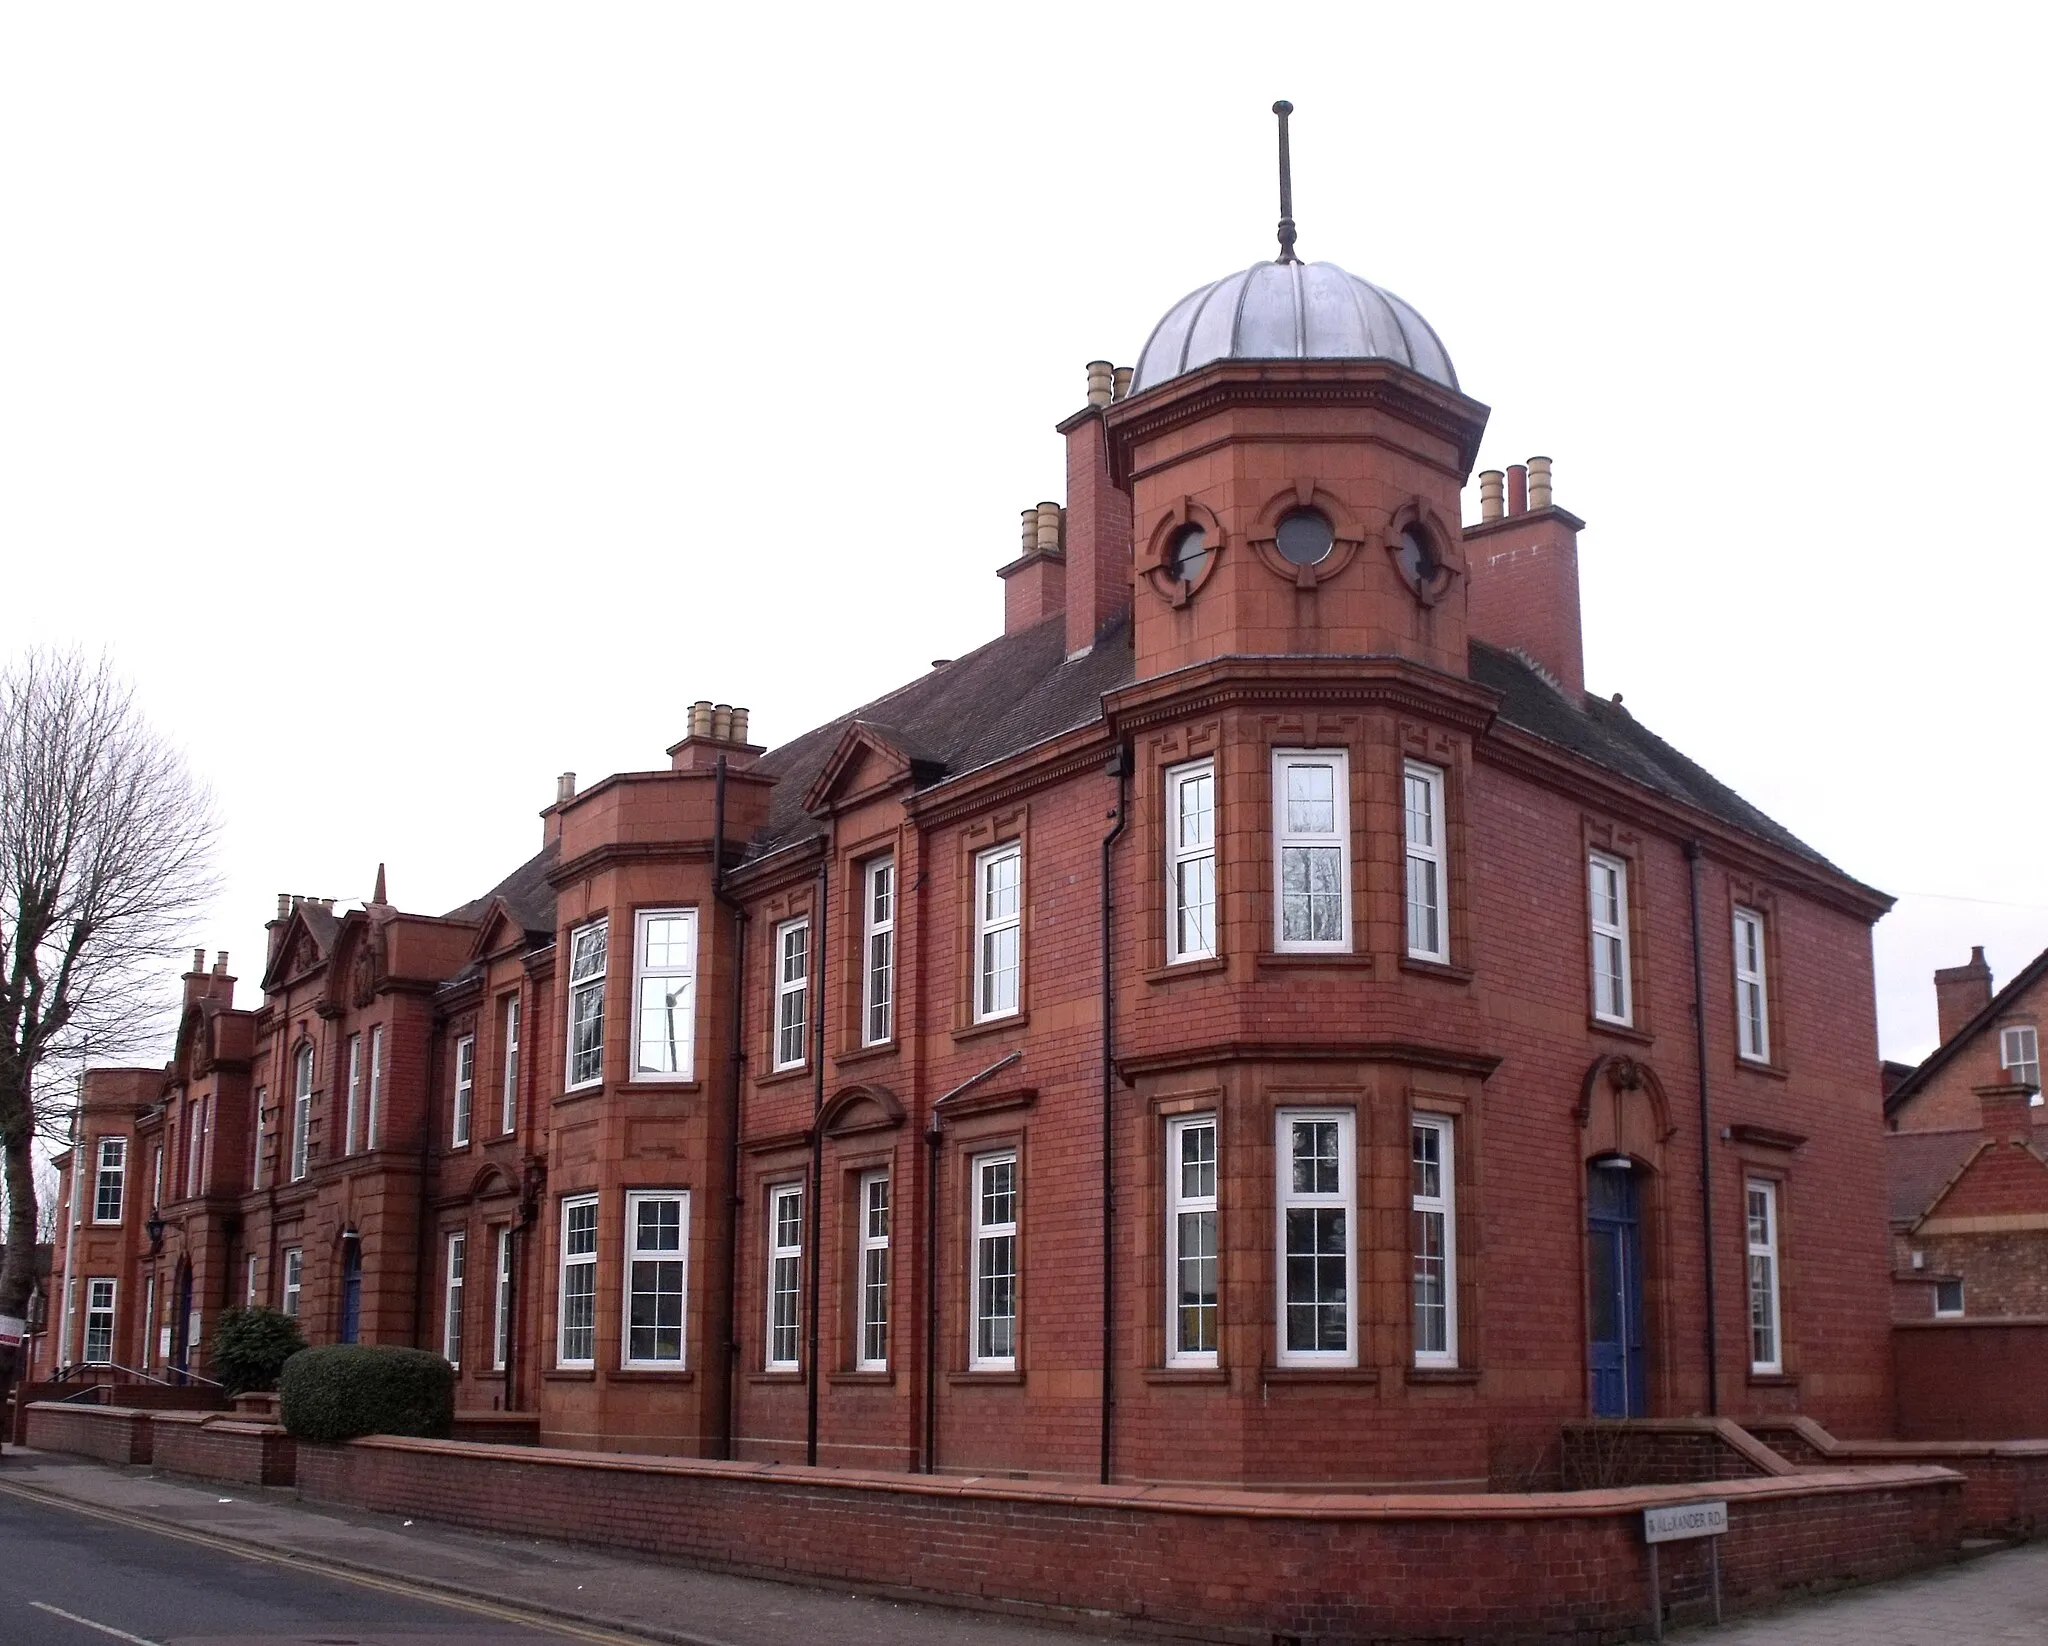 Photo showing: The red brick Acocks Green Police Station on Yardley Road in Acocks Green, Birmingham, England.
It is locally listed as Grade B.
It was built in 1909 for Yardley Rural District Council. It includes a Courthouse. Made of red brick and terracotta with a tile roof. Two-storeys. Almost symmetrical elevation to Yardley Road. Central section with rusticated ground floor, above which is a central pedimented bay with flanking projecting bays with segmental pediments. To either side are two-storey canted bays. Sliding sash windows throughout. On corner with Alexander Road is an octagonal turret with lead dome and keyed ocular windows. Low boundary wall with mould terracotta coping.

This shows the octagonal turret  on the corner of Alexander Road.